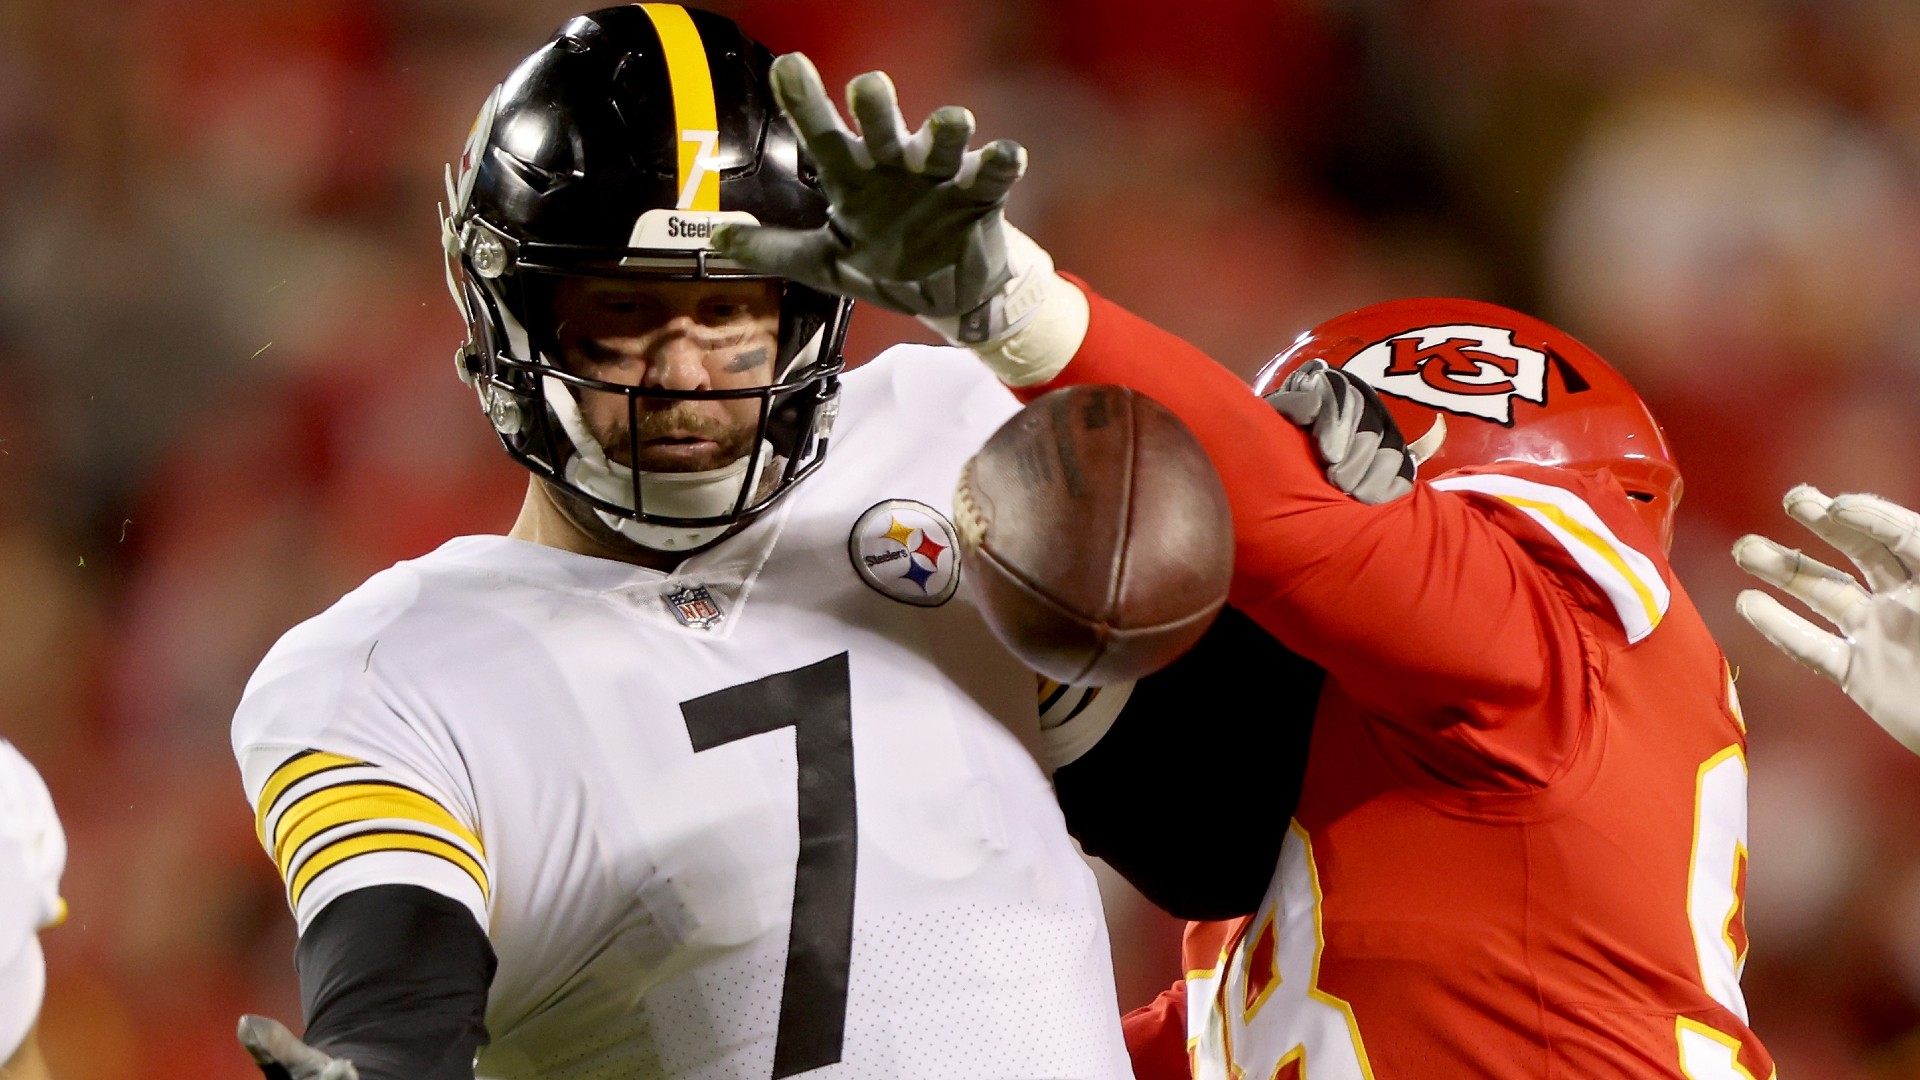 Biggest NFL underdogs in wild-card history: Steelers face long odds to take down Chiefs